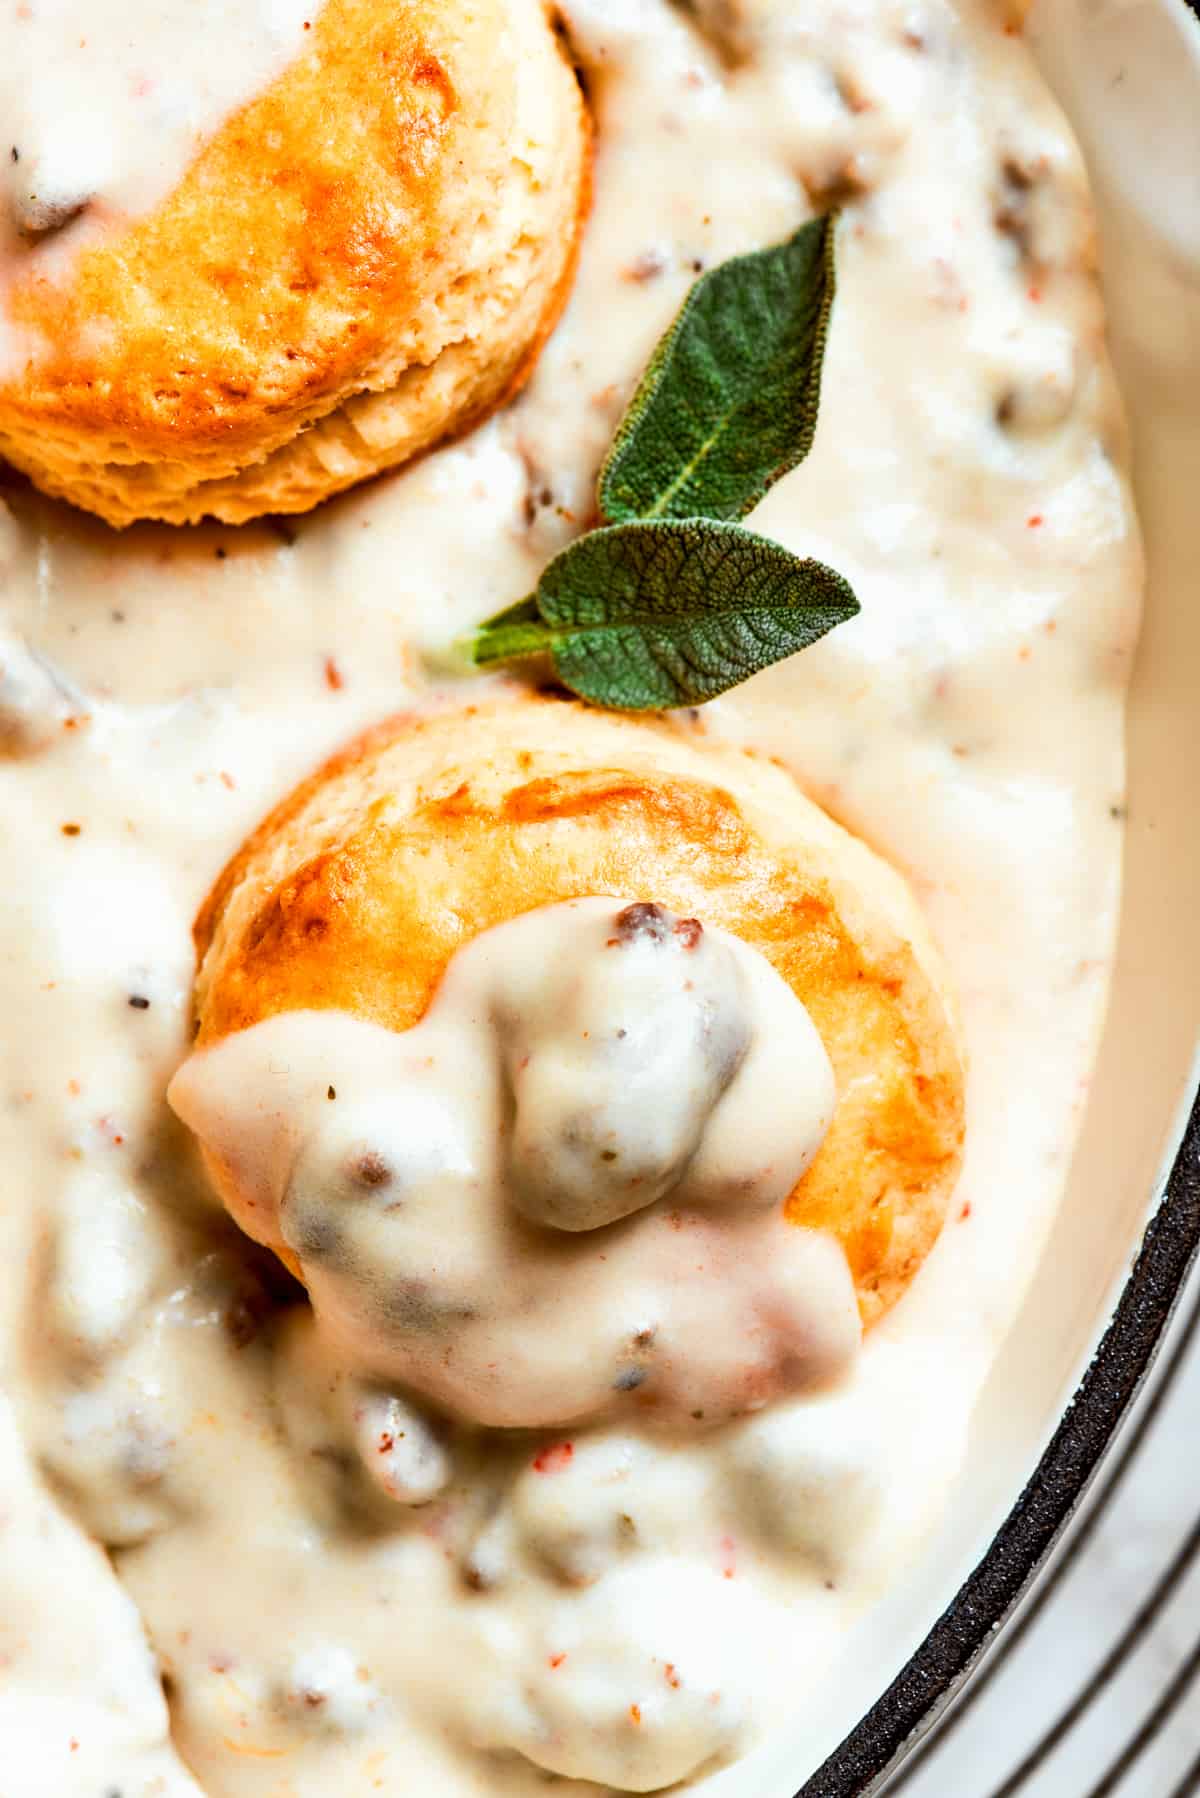 Close-up image of biscuits topped with sausage gravy.